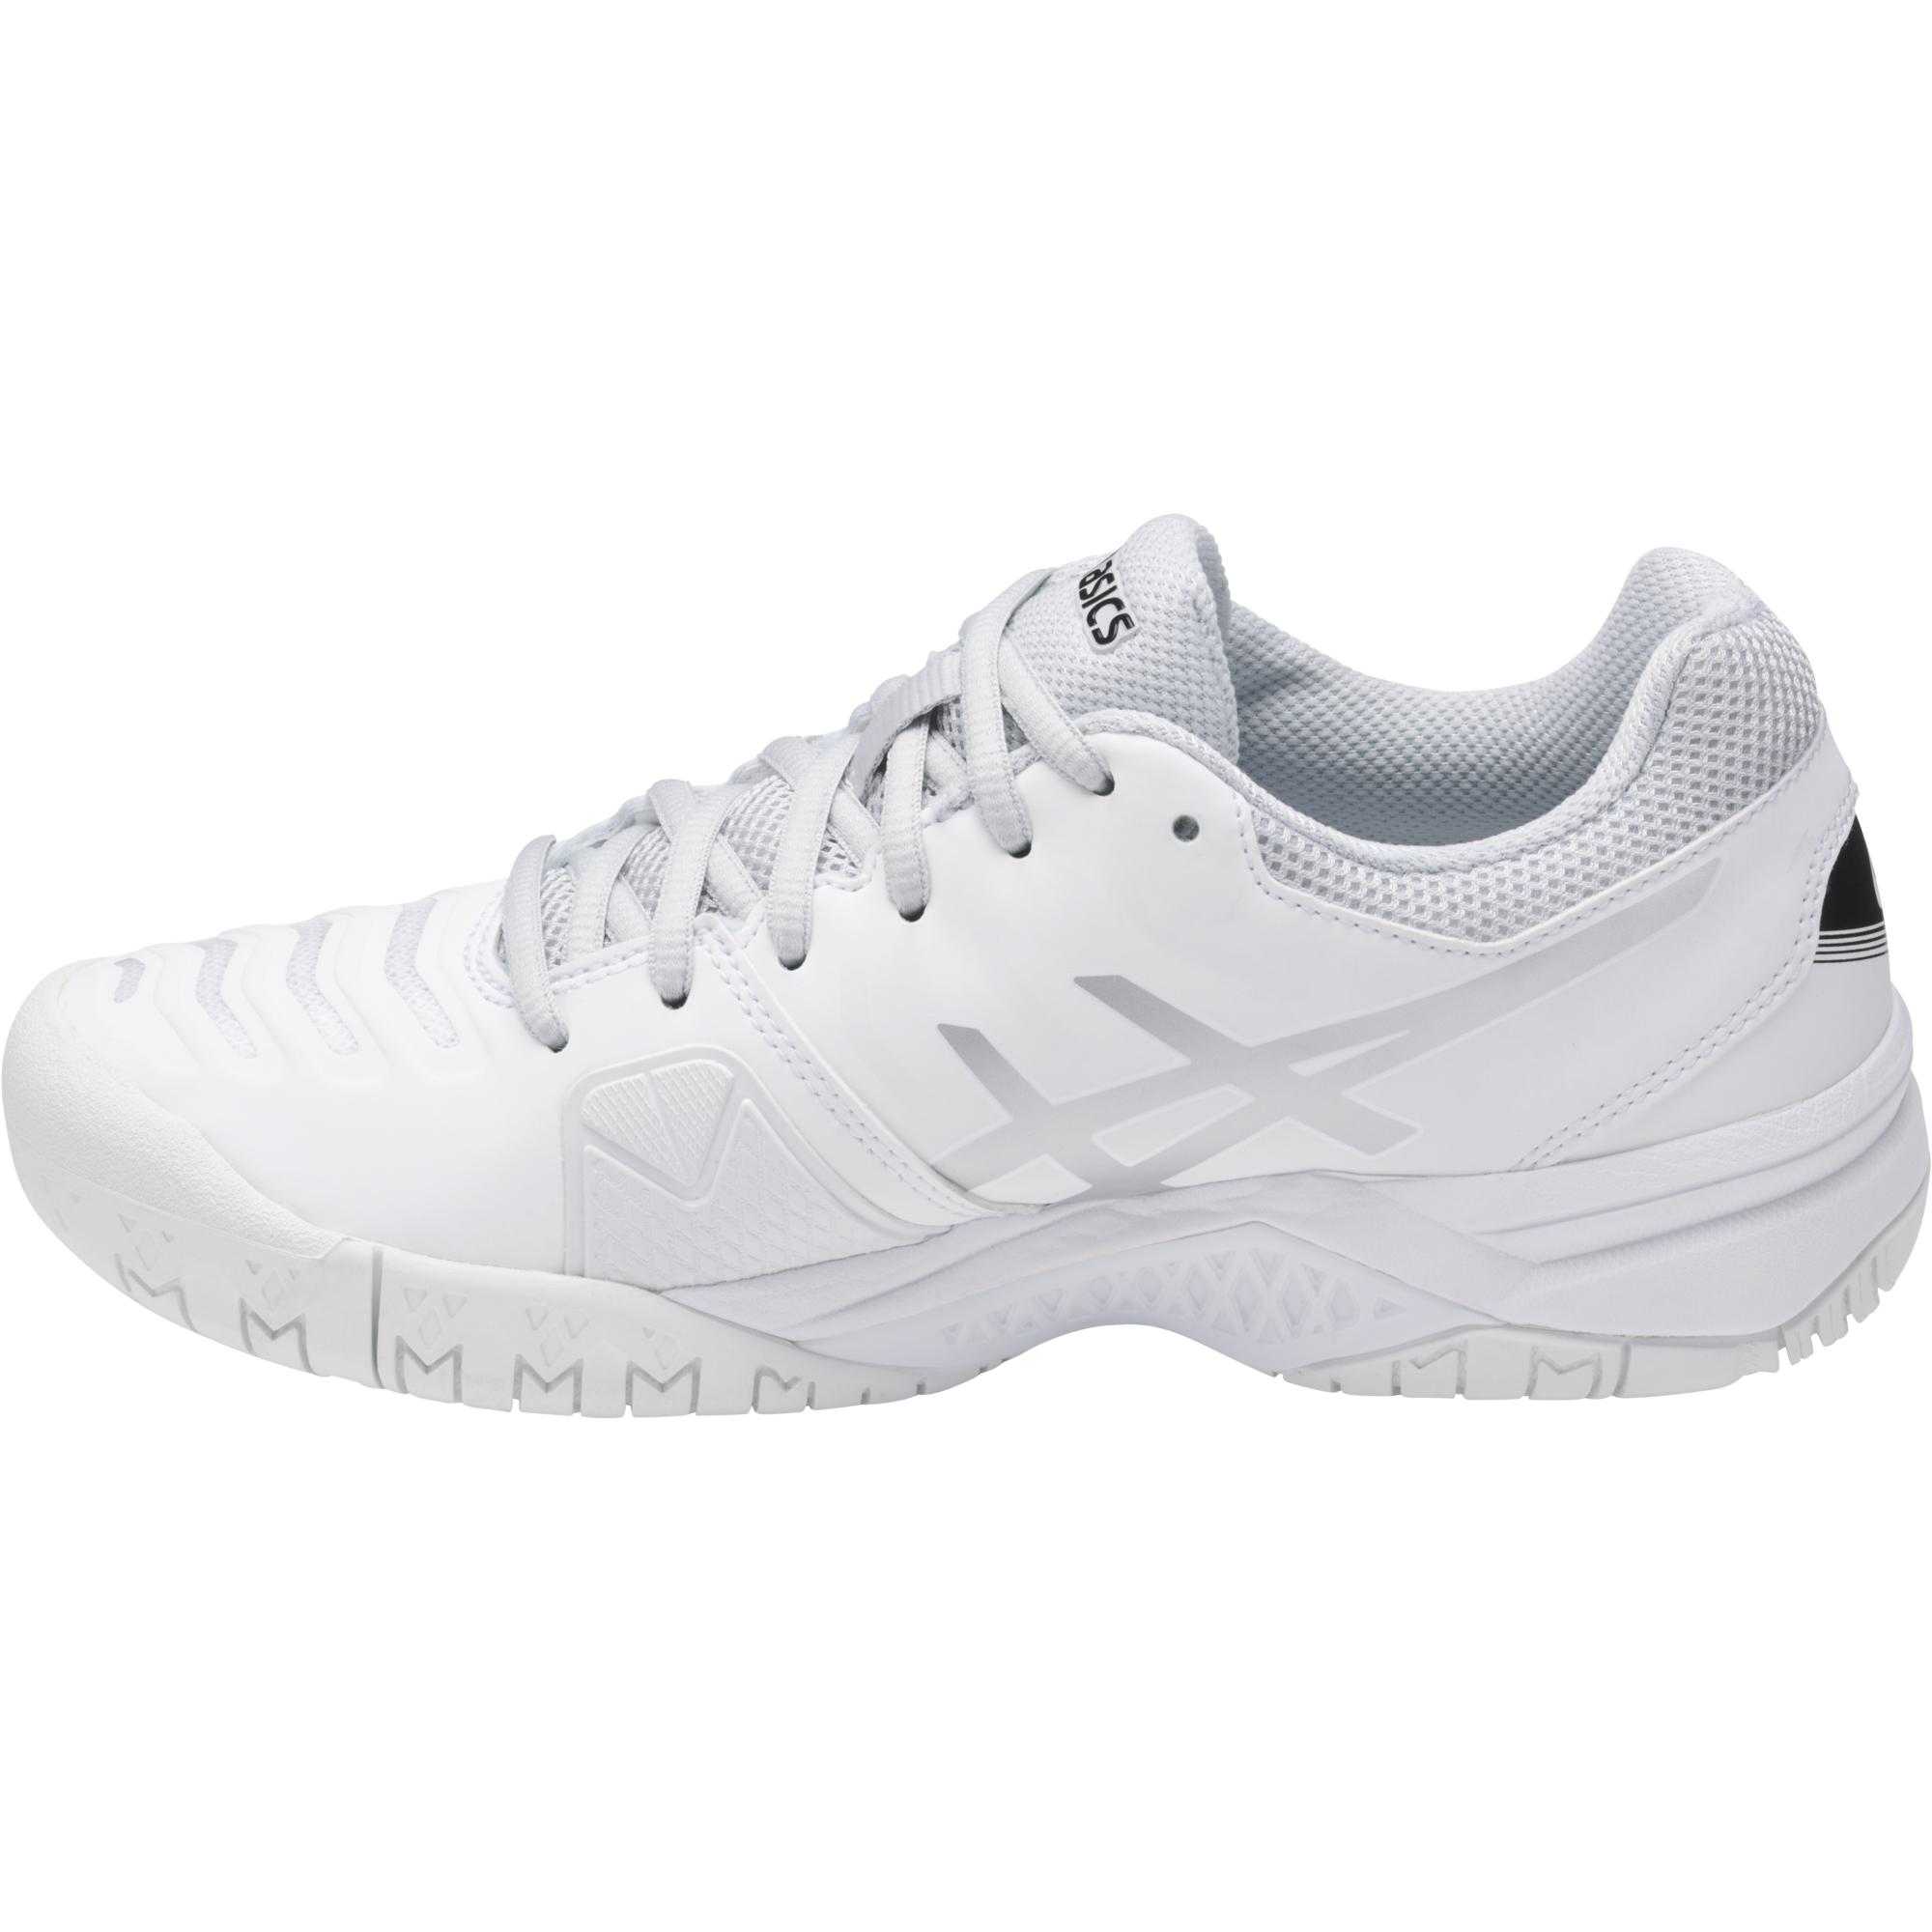 Asics Womens GEL-Challenger 11 Tennis Shoes - White/Silver - 0